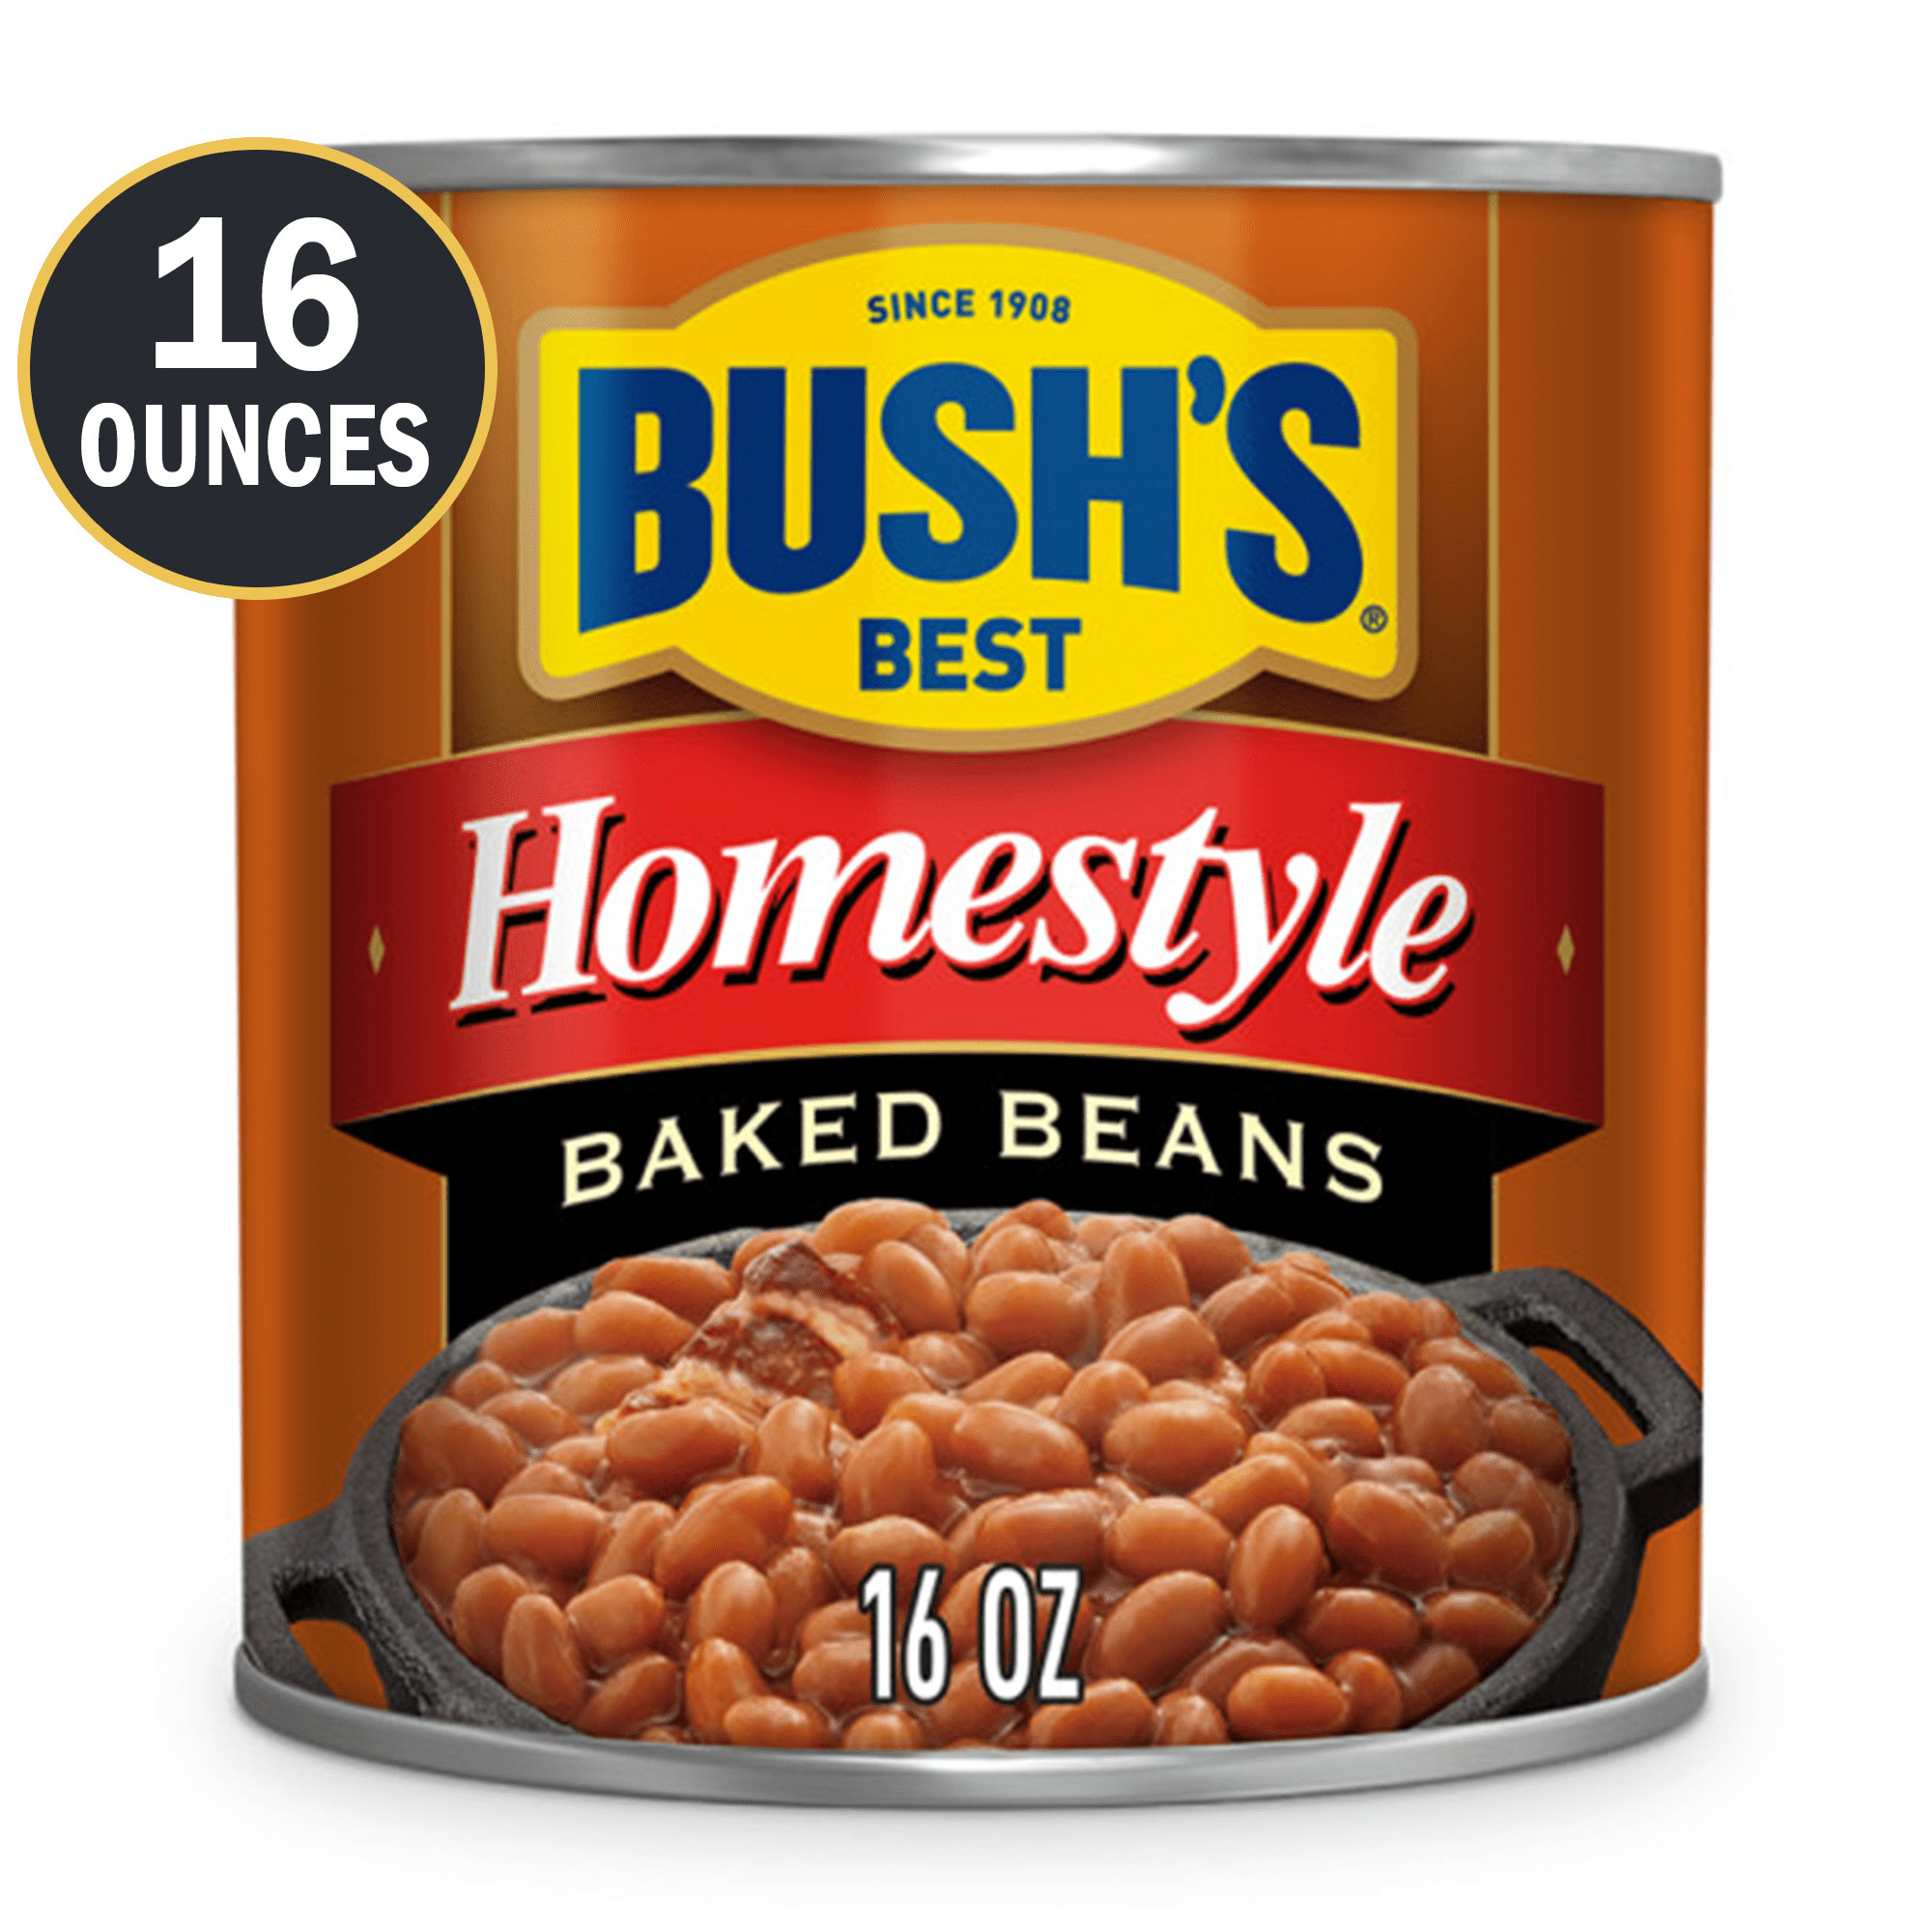 Bush's Homestyle Baked Beans, Canned Beans, 16 oz Can - image 1 of 7